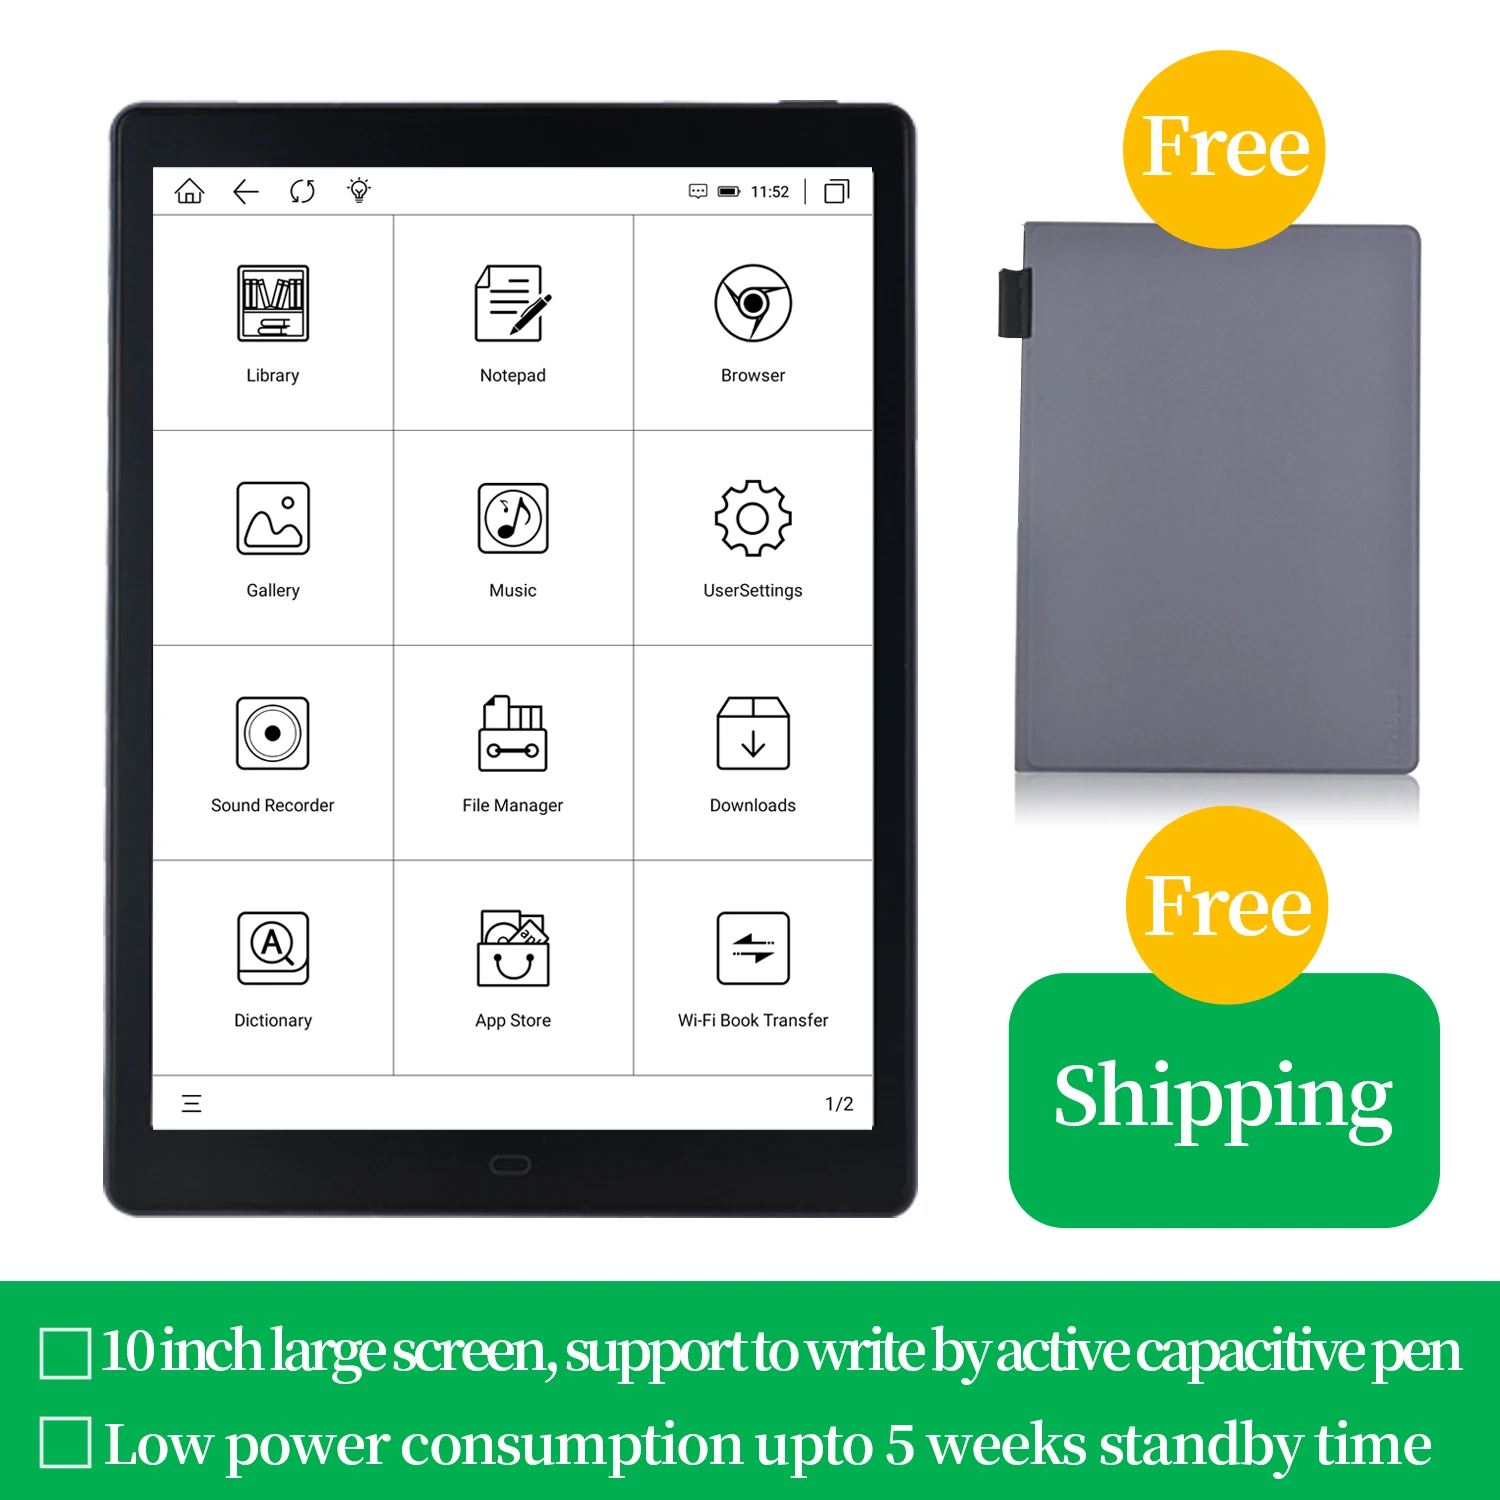 New arrival 2021 likebook P10W 褝谢械泻褌褉芯薪薪邪褟 泻薪懈谐邪 eReader for 10 inch with andorid 8.1 OS Support to write by WACOM pen - ANKUX Tech Co., Ltd